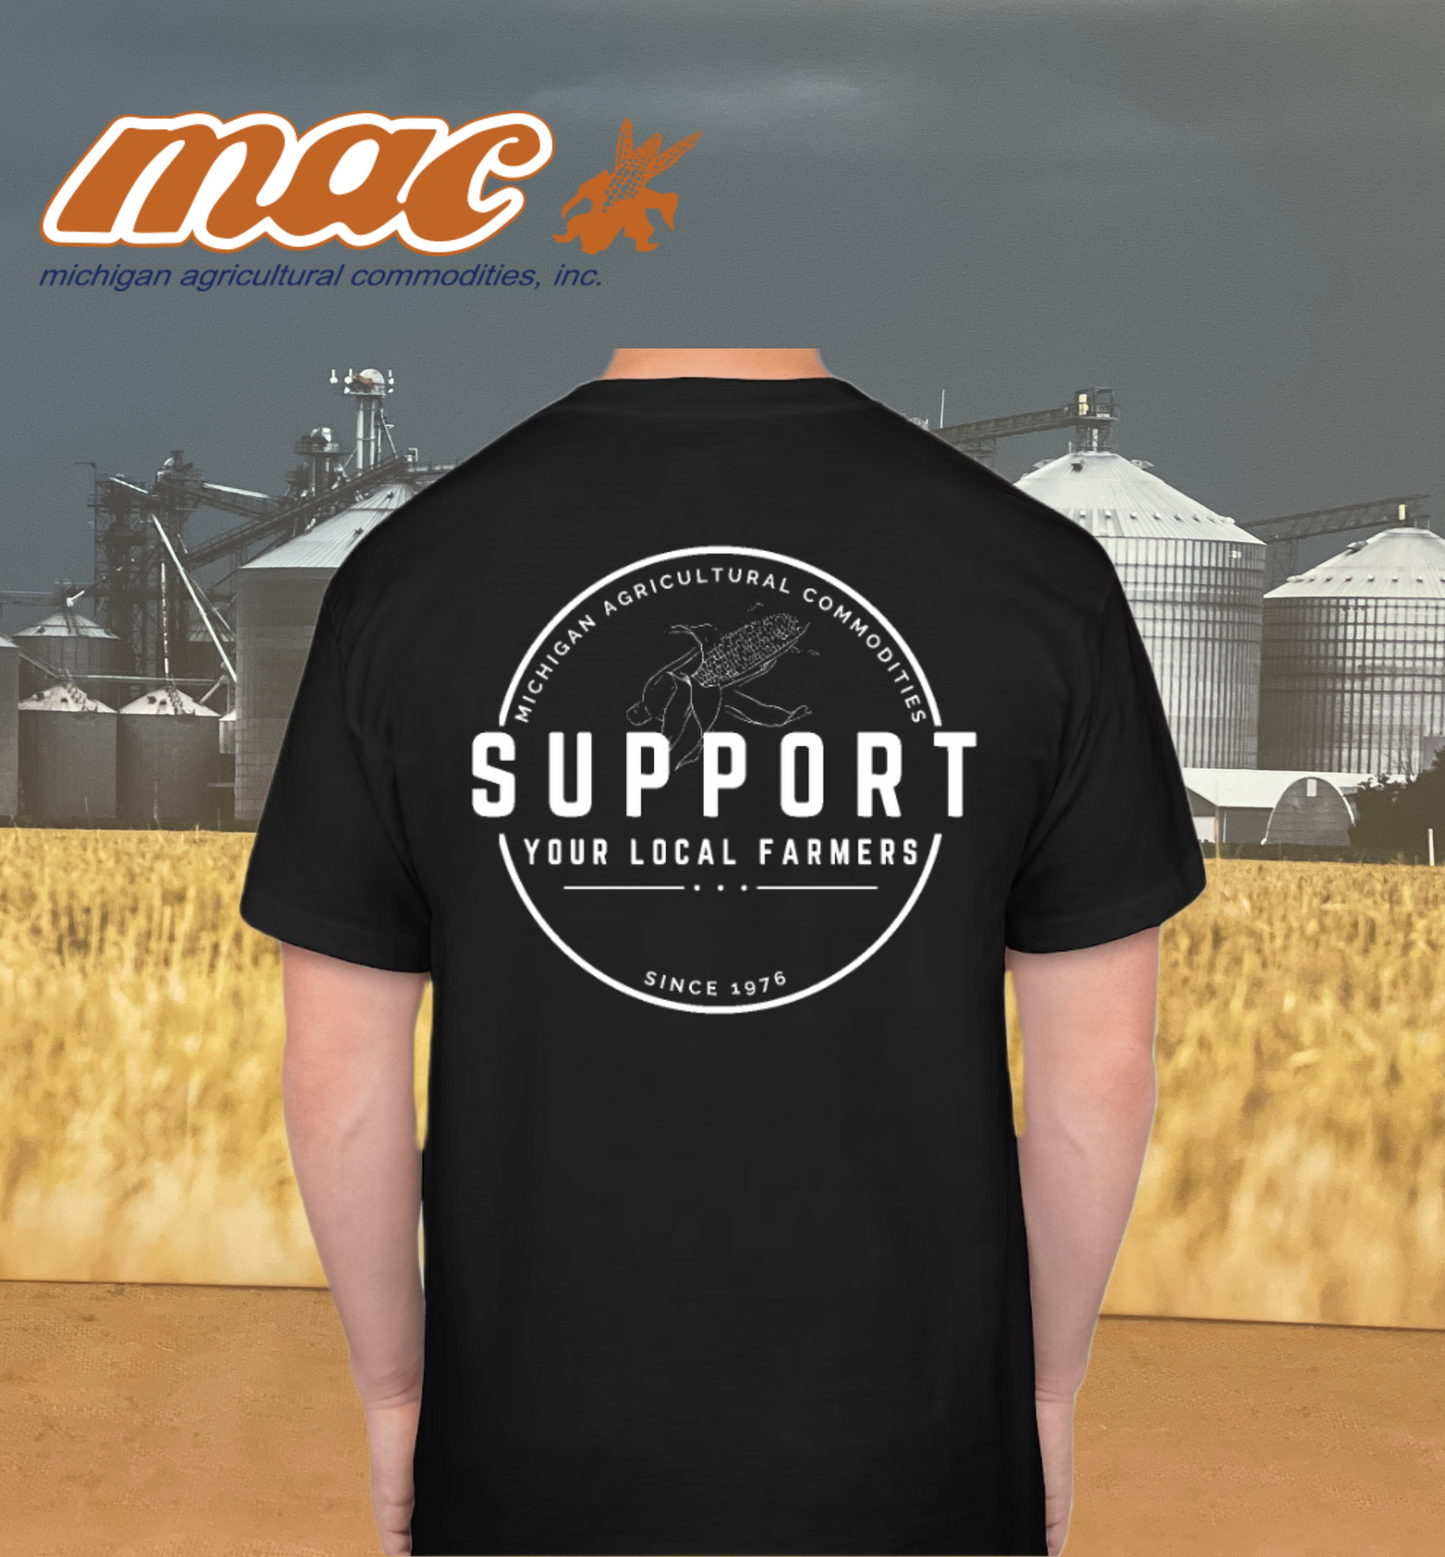 M.A.C. Support Your Local Farmers T-Shirt - BLACK